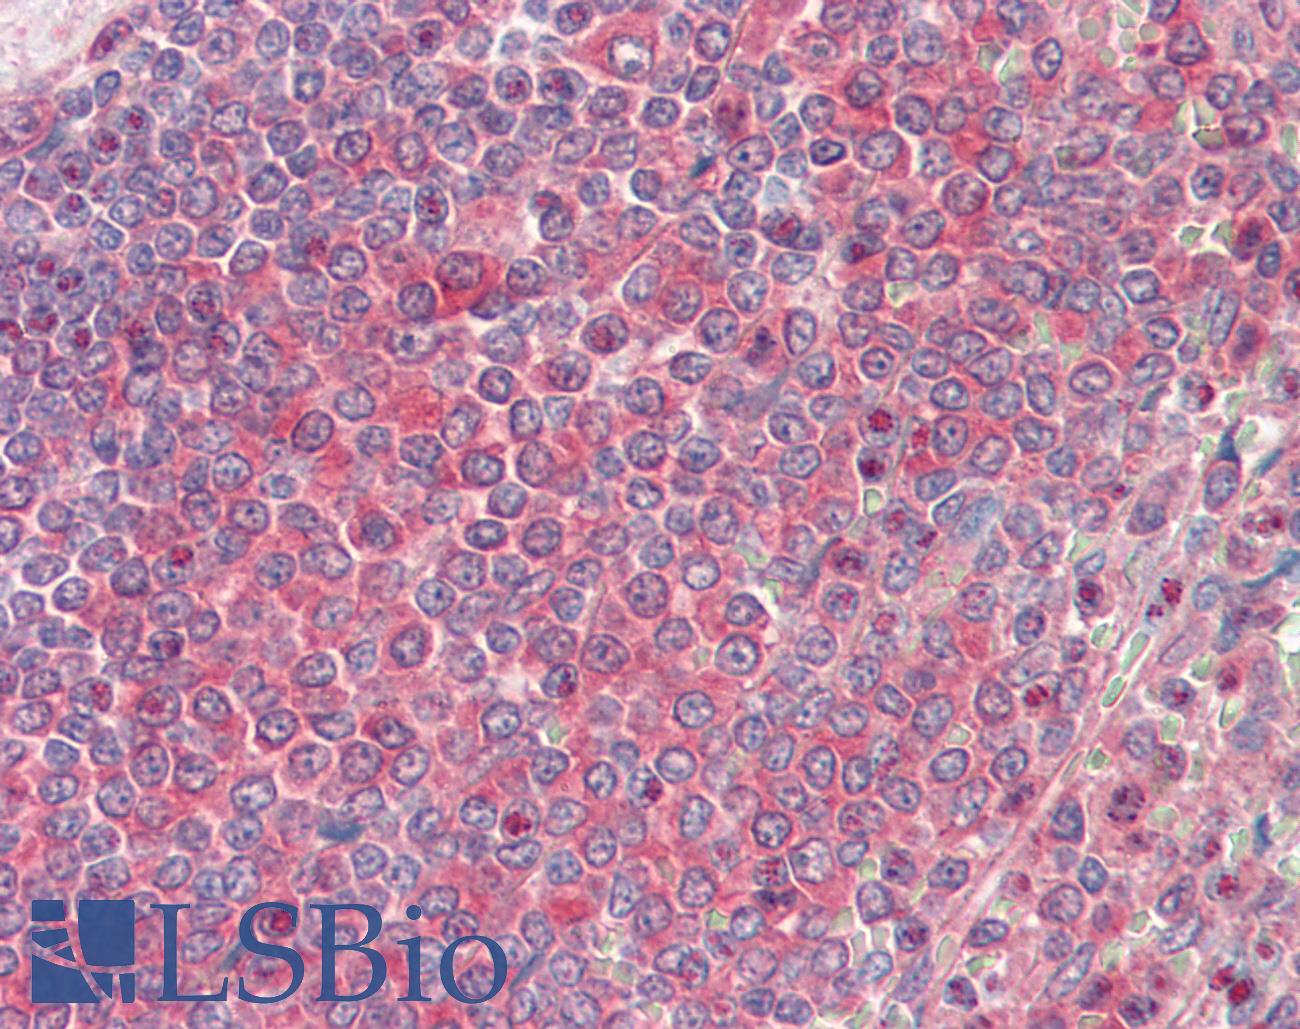 NME2 Antibody - Anti-NME2 / NM23 antibody IHC staining of human spleen. Immunohistochemistry of formalin-fixed, paraffin-embedded tissue after heat-induced antigen retrieval. Antibody dilution 1:100.